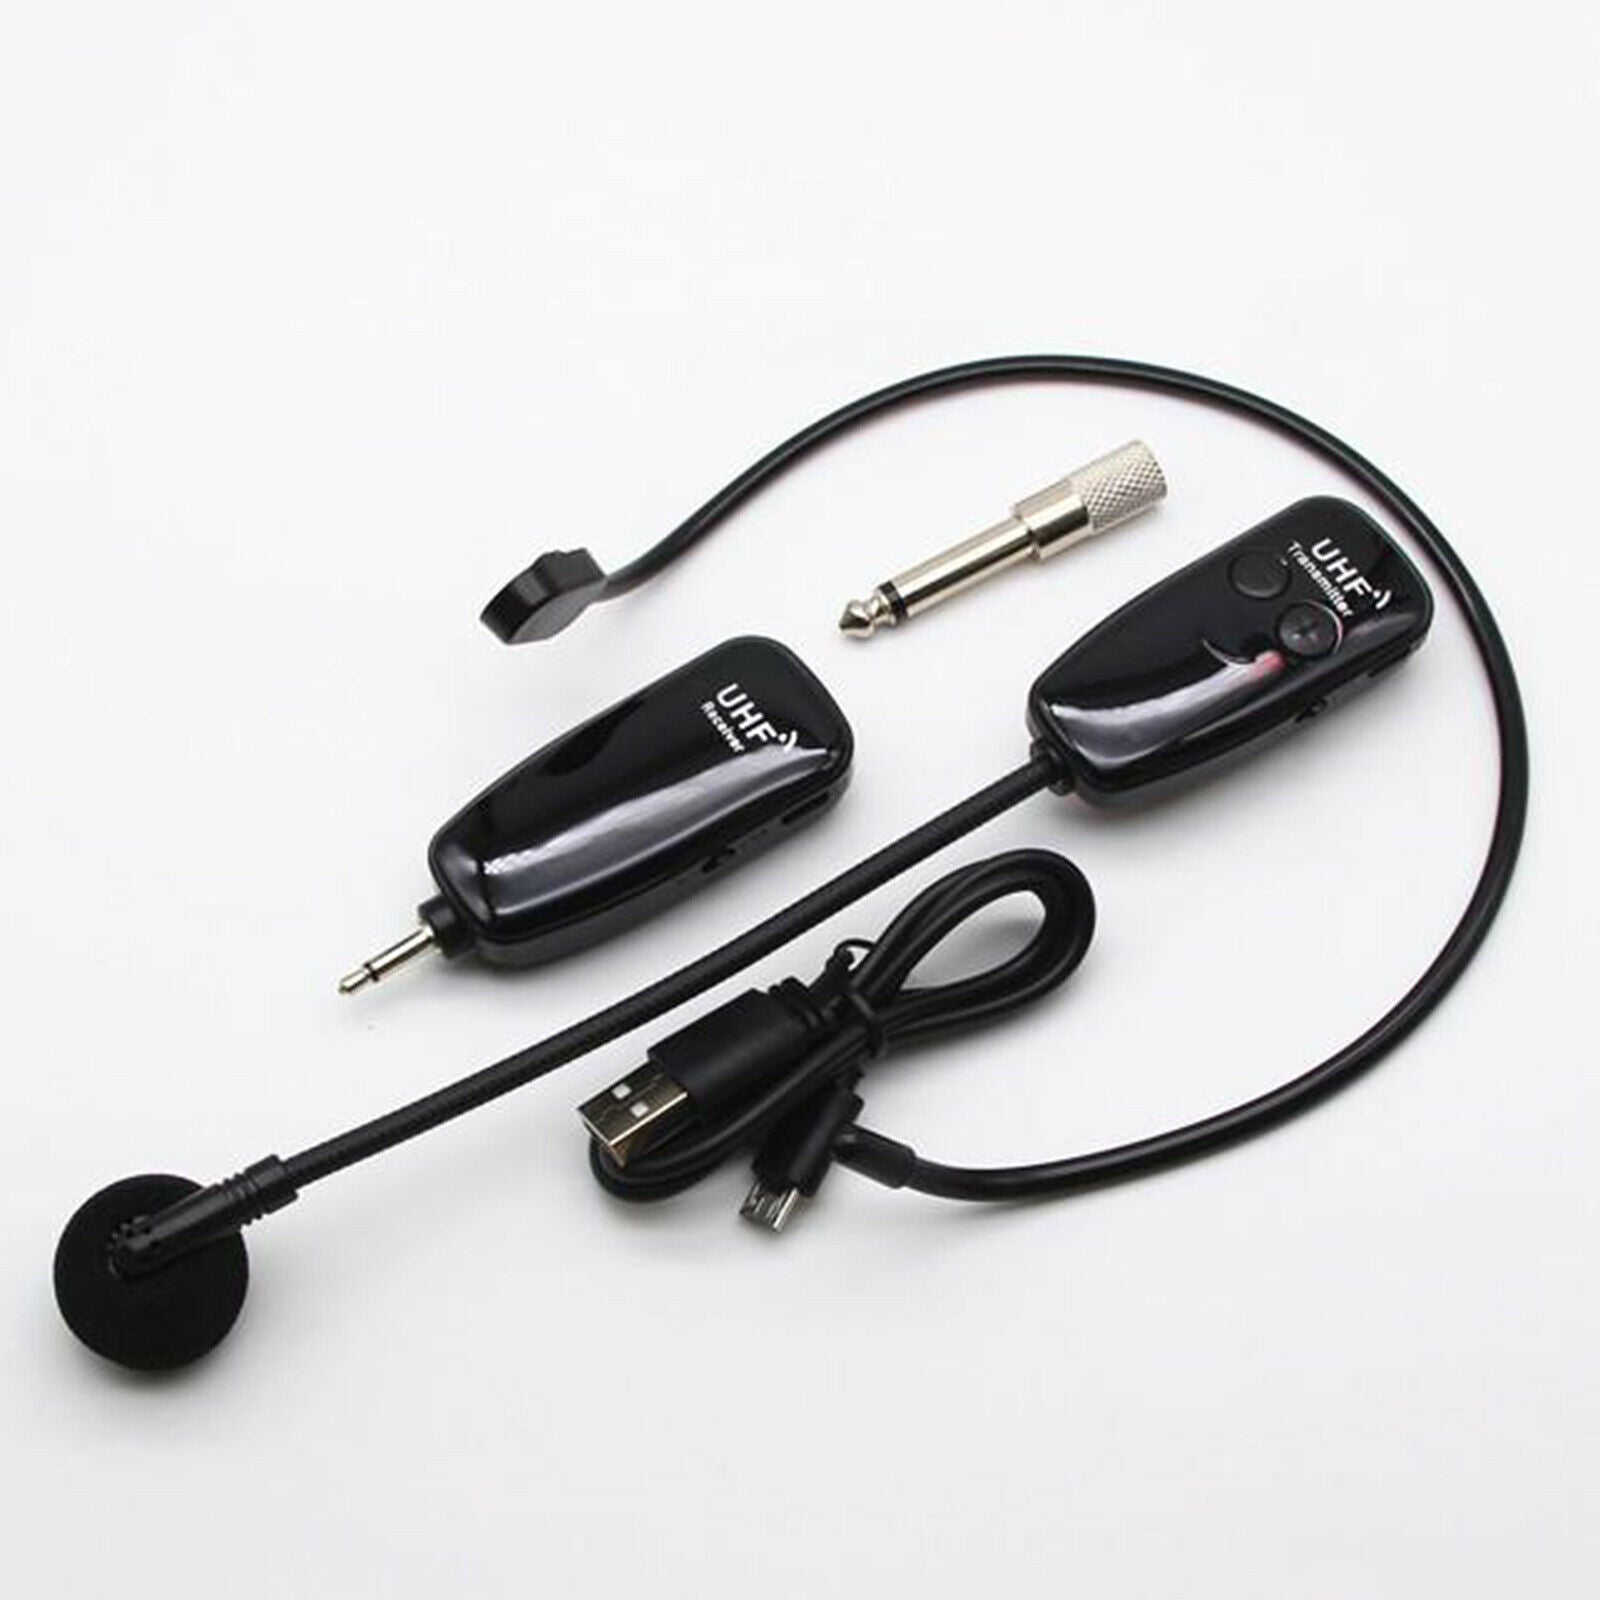 Wireless Microphone Headset + Wireless Transmitter +6.35mm Converter + USB Cable